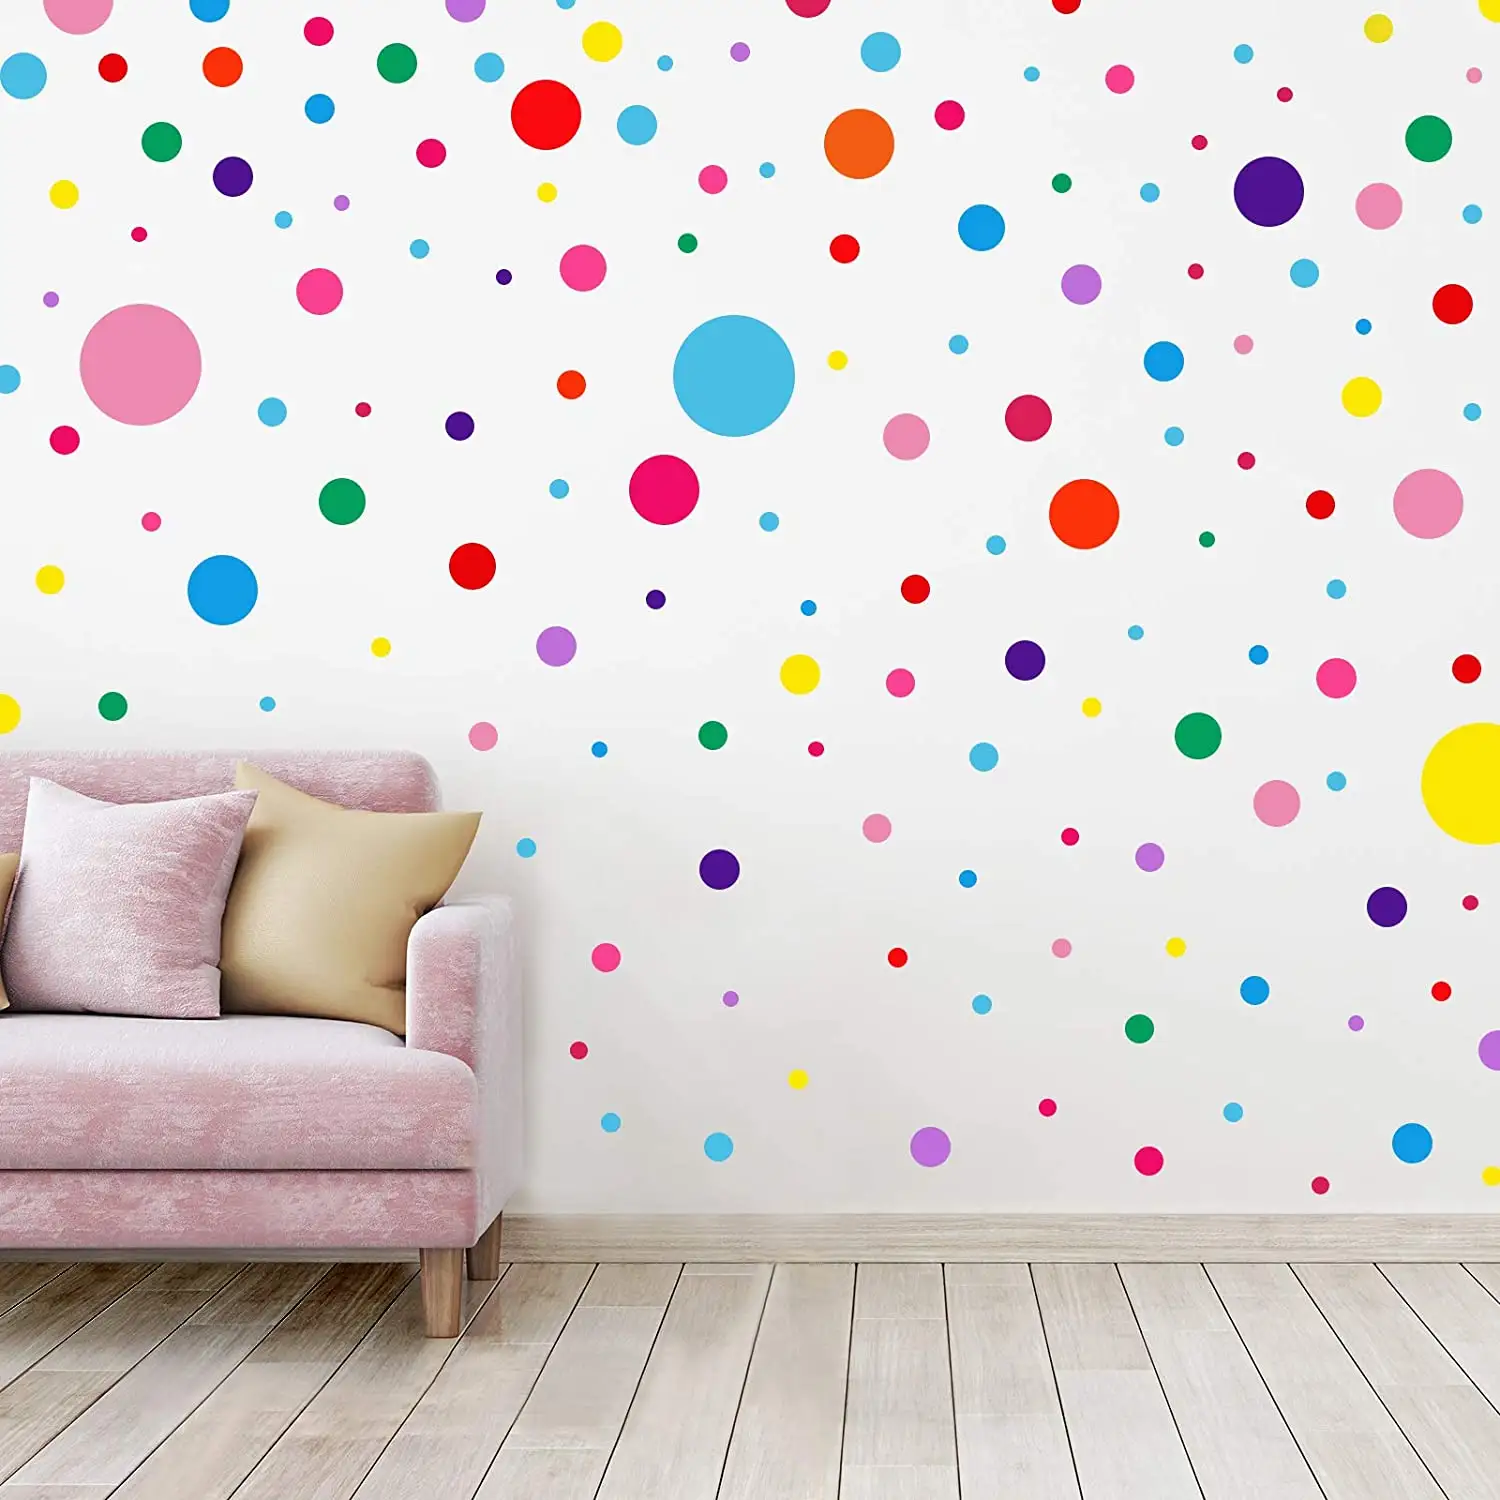 Polka Dots Wall Stickers Circle Wall Decal for Kids Bedroom Living Room Classroom Decor Removable Vinyl Wall Stickers